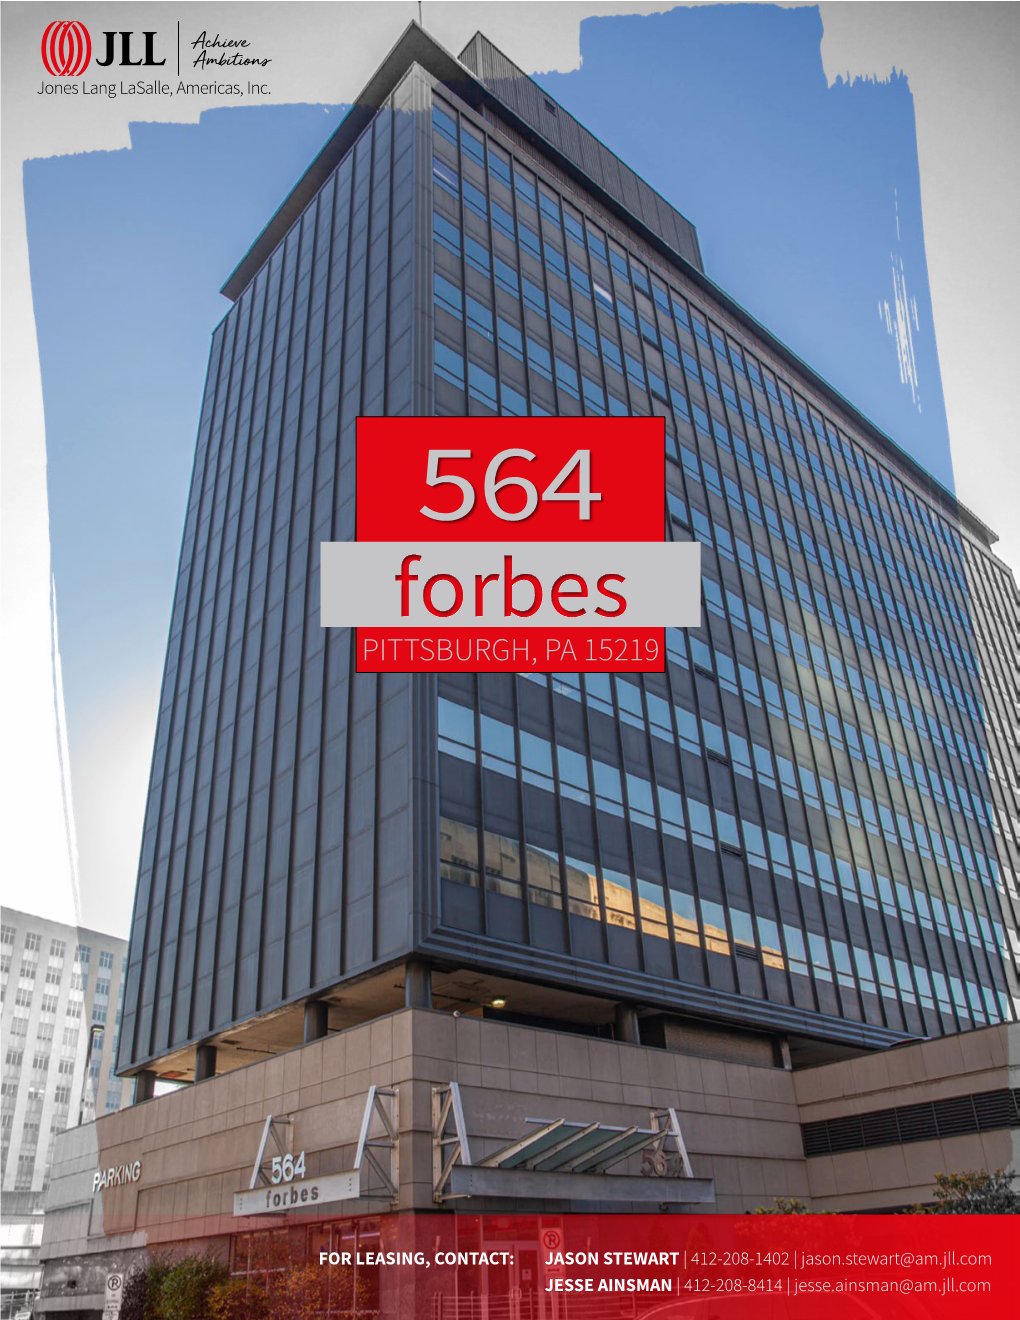 Forbes PITTSBURGH, PA 15219